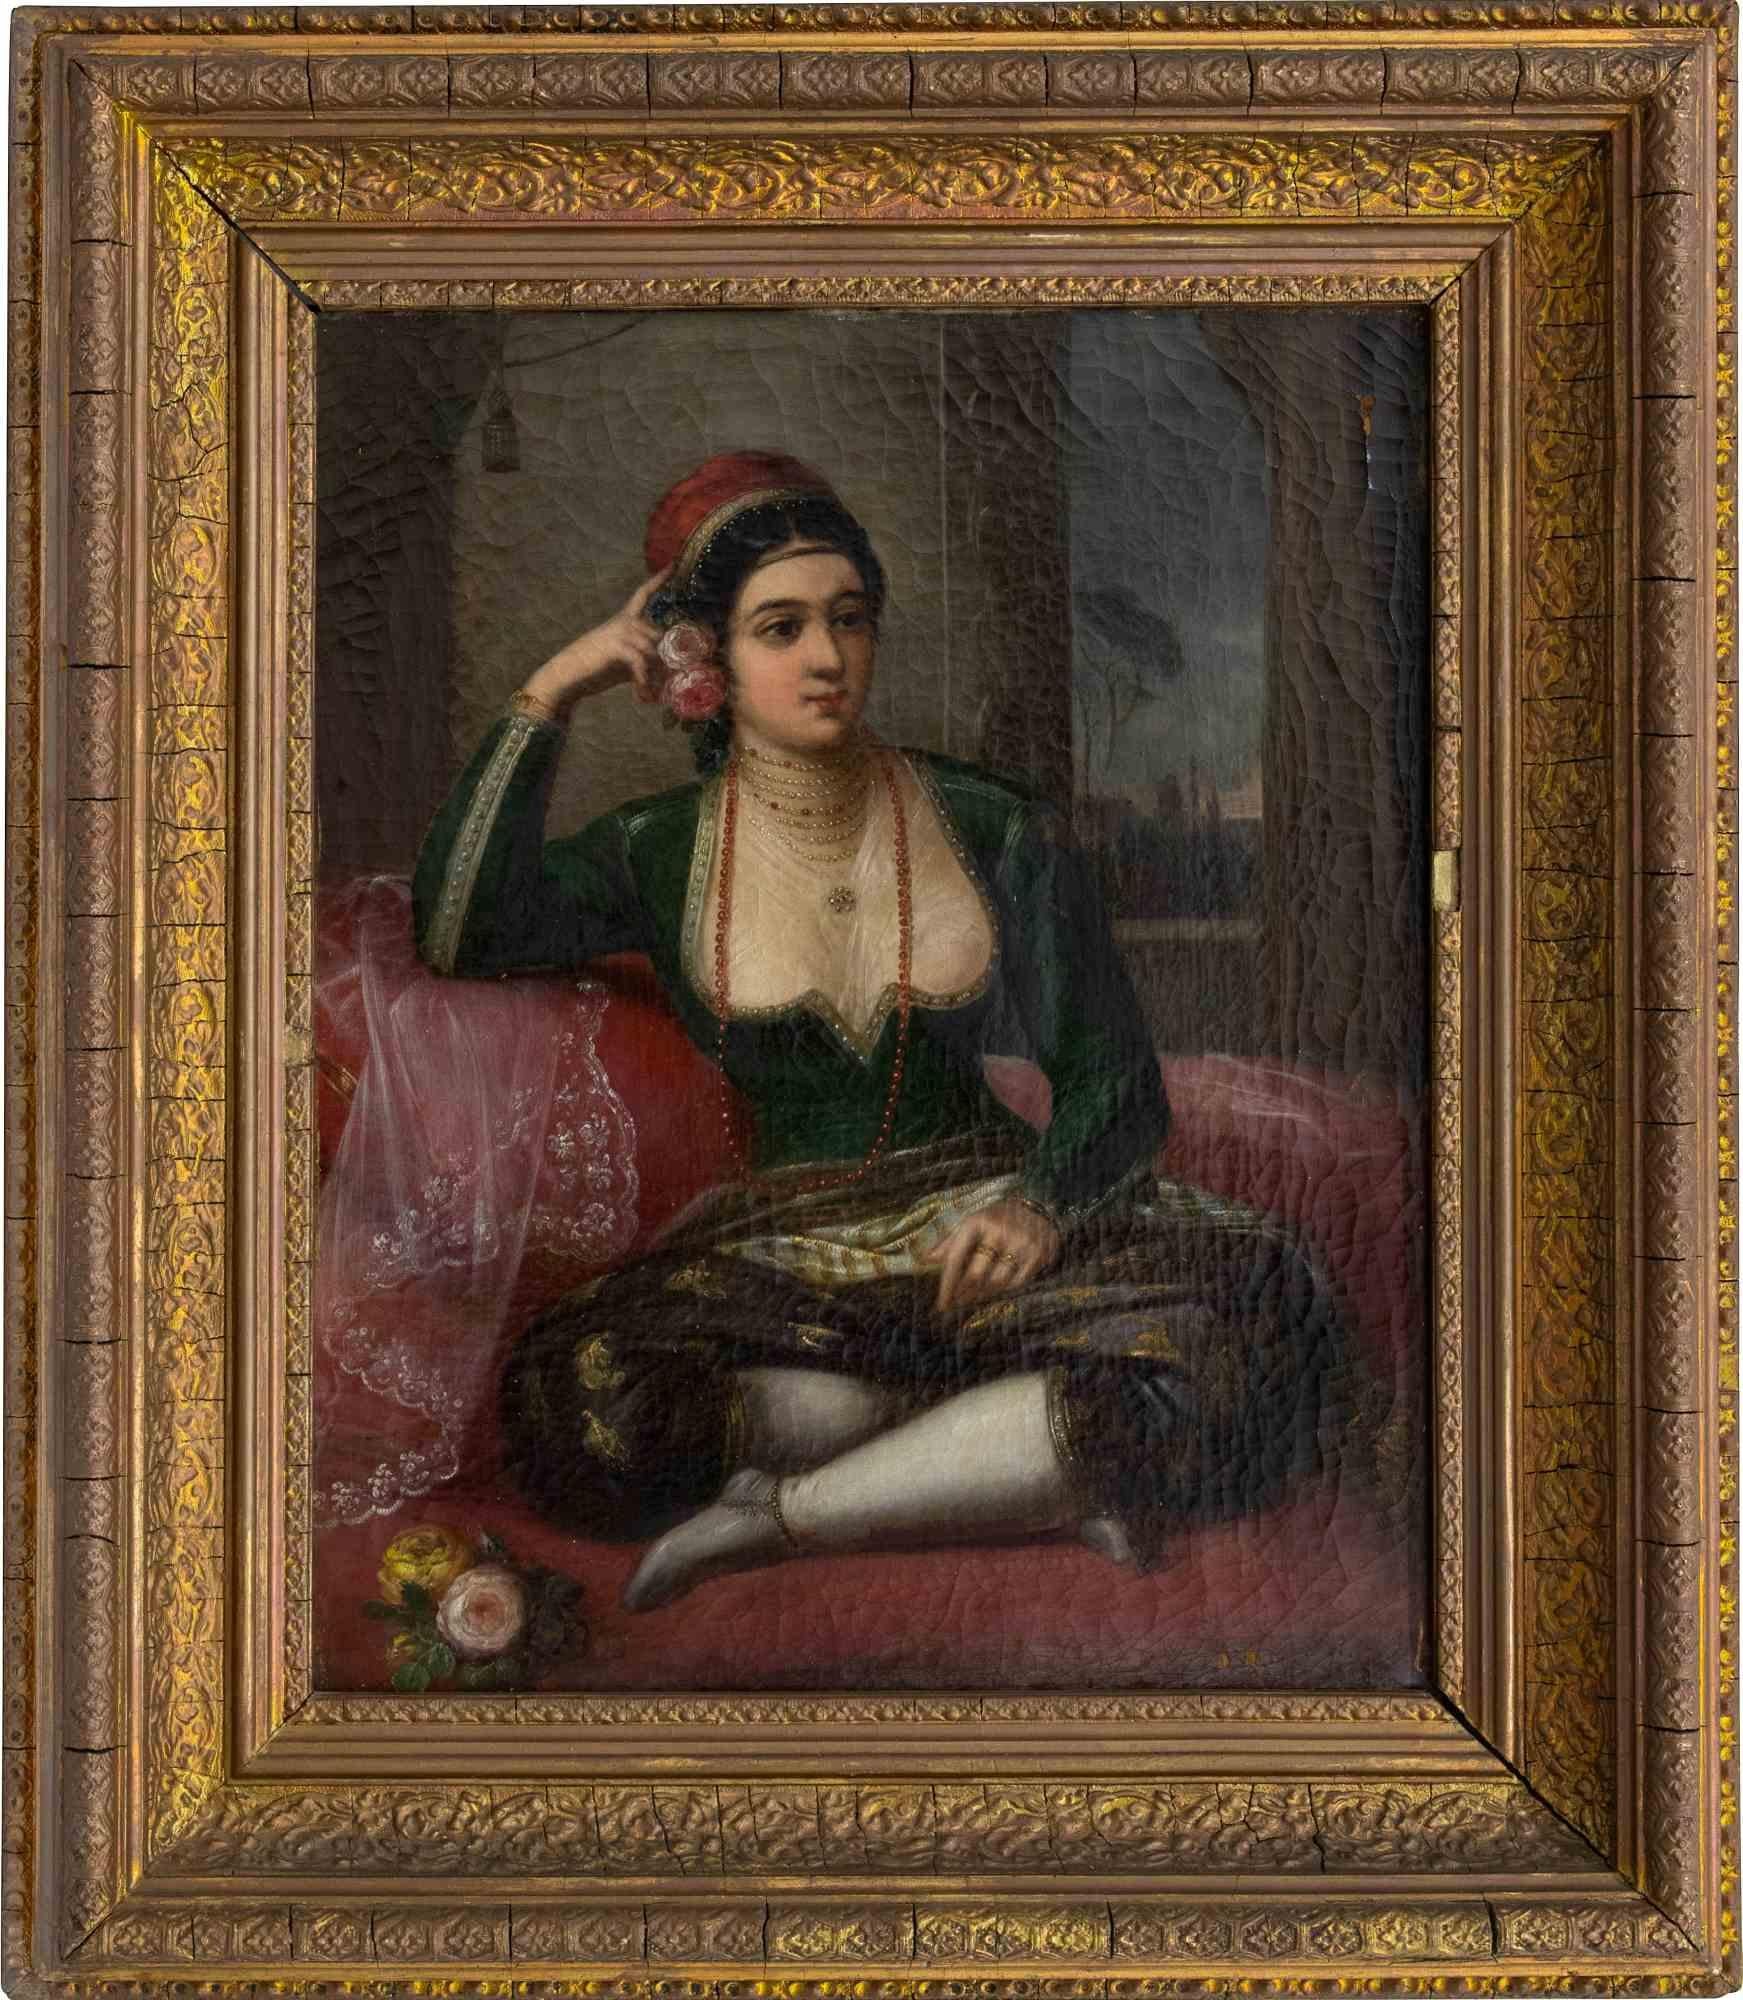 Unknown Portrait Painting - Lady in the Harem - Oil on Canvas - 19th Century